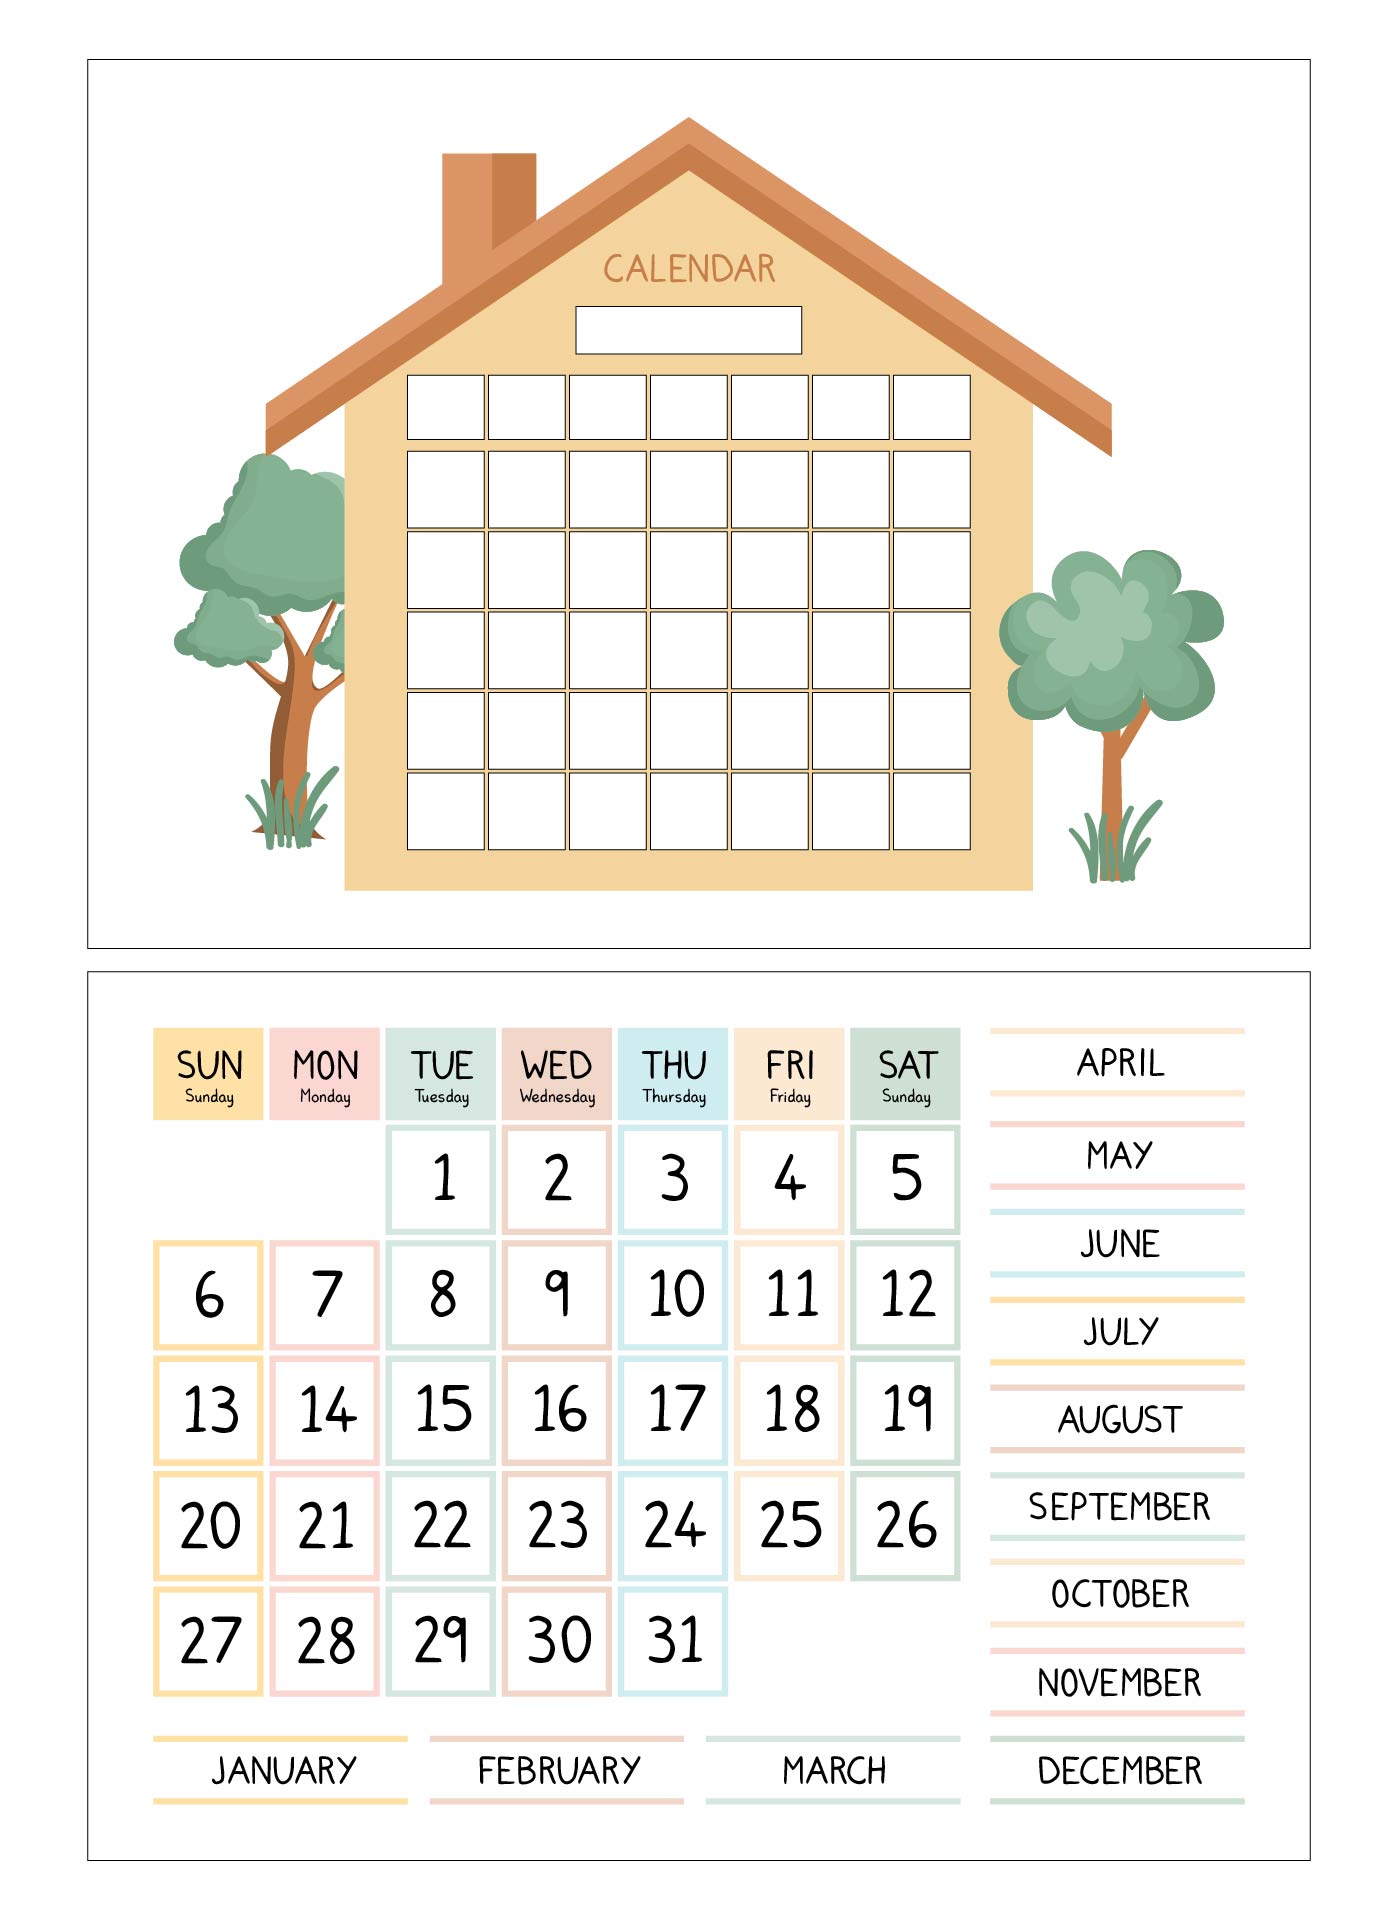 Cute Printable Calendar For Home Of School With Kids